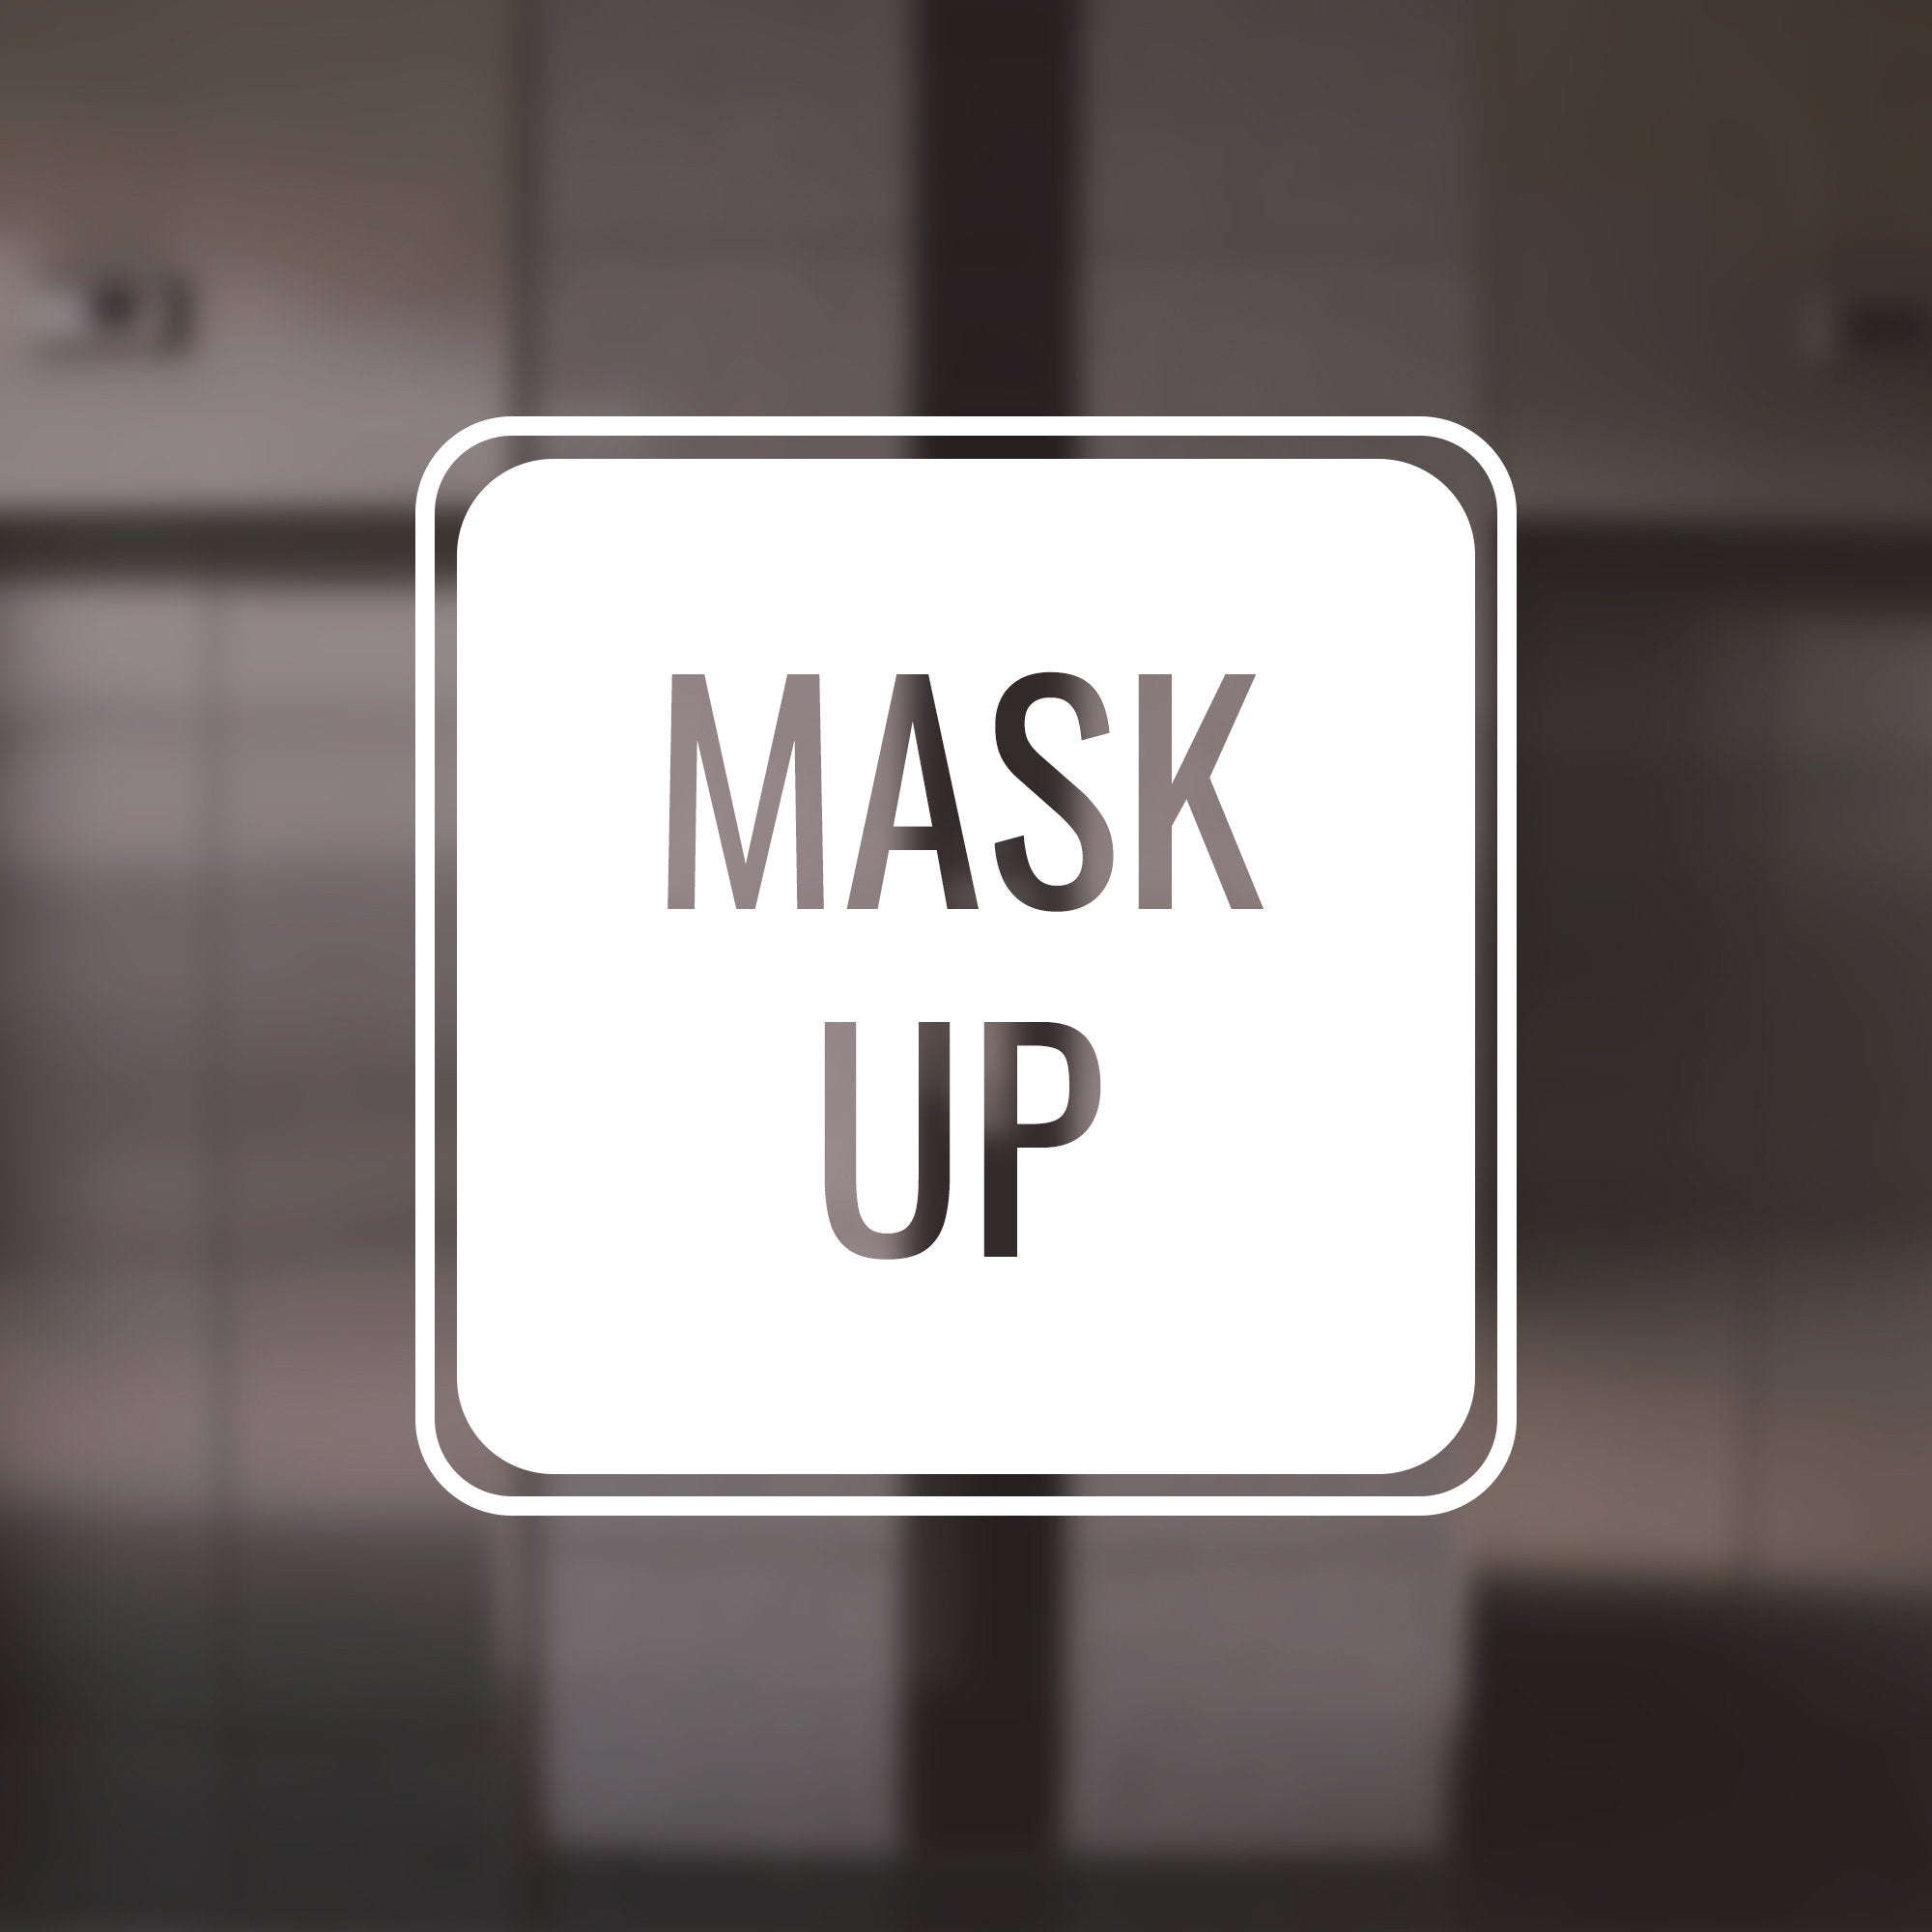 Mask Up - Social Distancing Vinyl Decal for Walls, Windows, Doors, Glass for Businesses, Stores, Shops, Restaurants, and More!